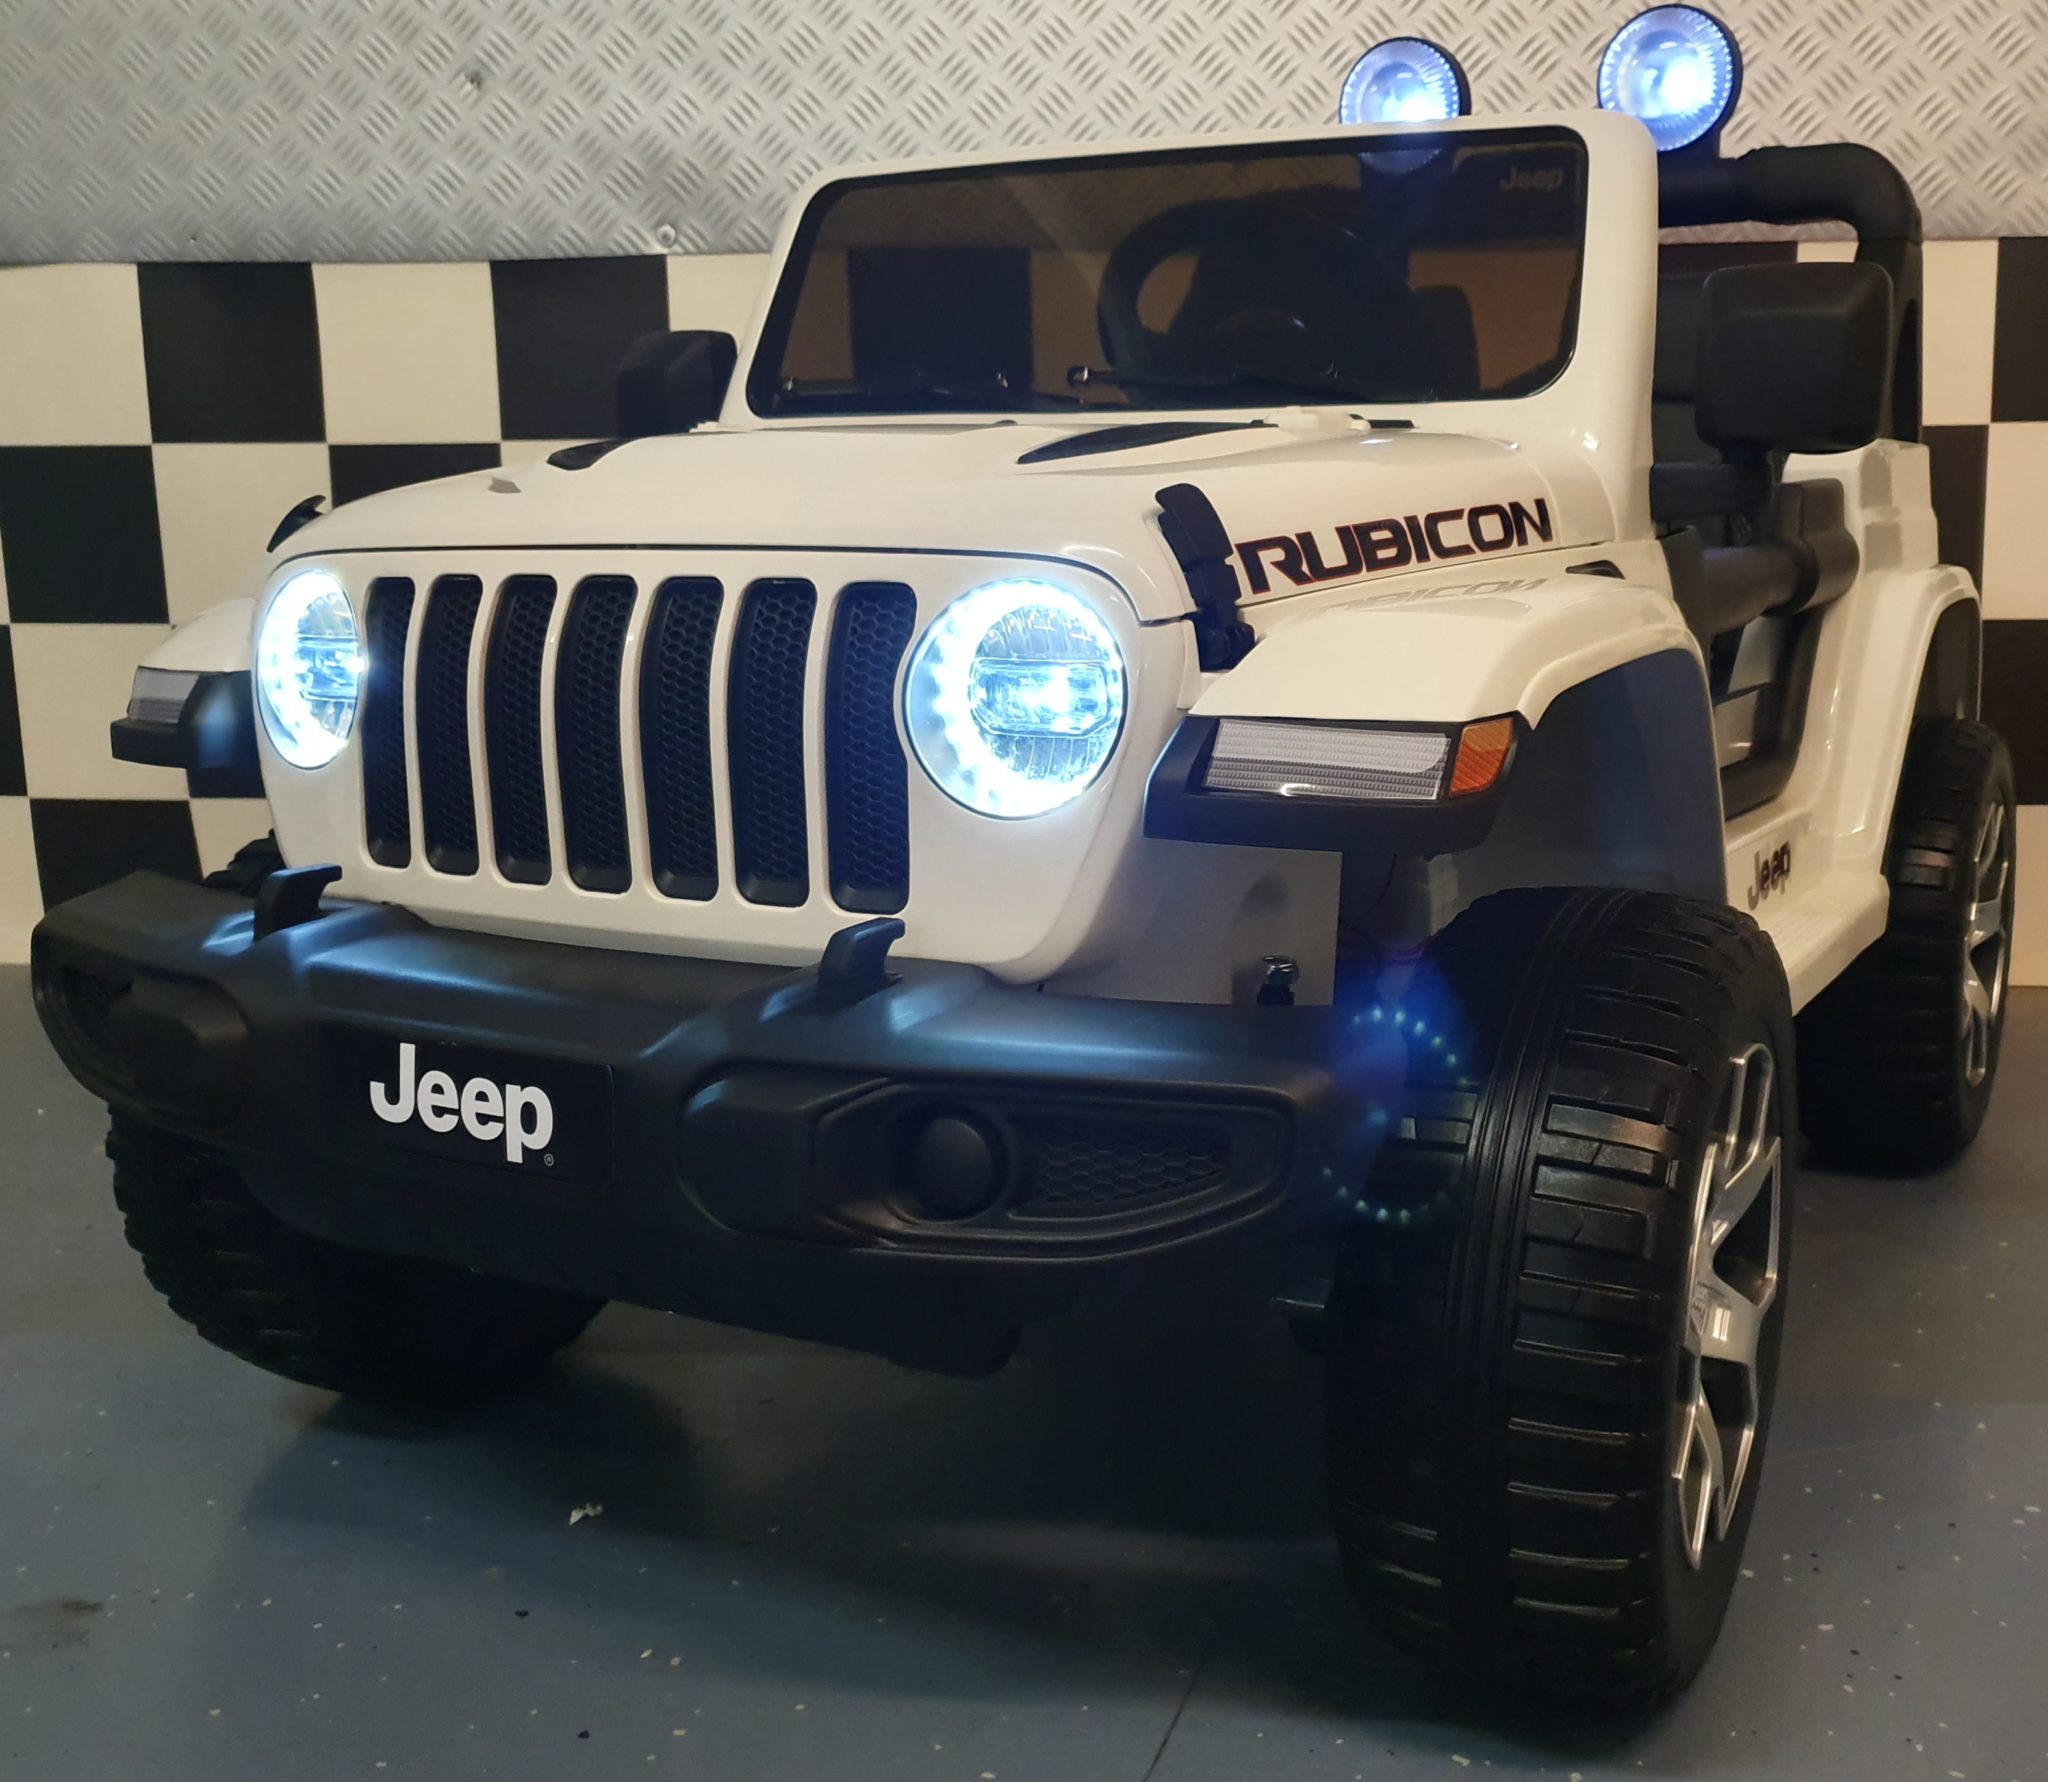 Maak avondeten Nationale volkstelling verder JEEP WRANGLER 1 PERSOONS 4WD | WIT | 12V | 2.4G RC - Kids-Accu Cars